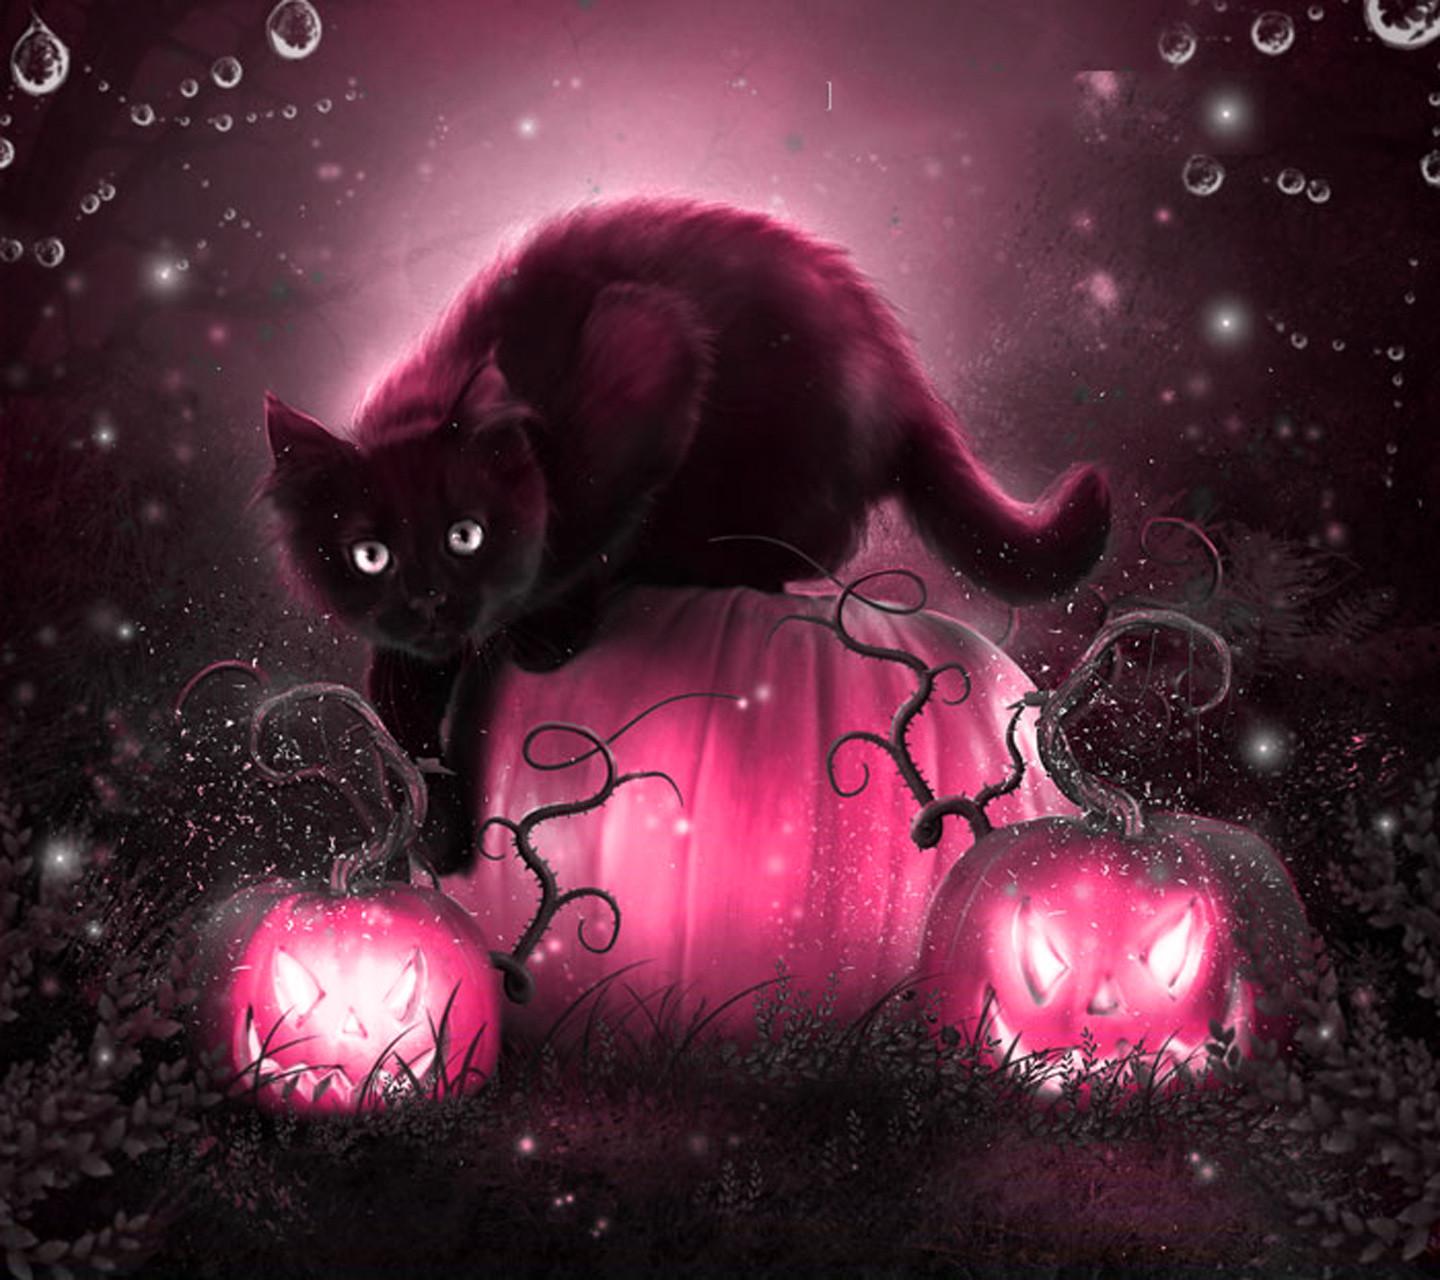 Halloween cats for all!